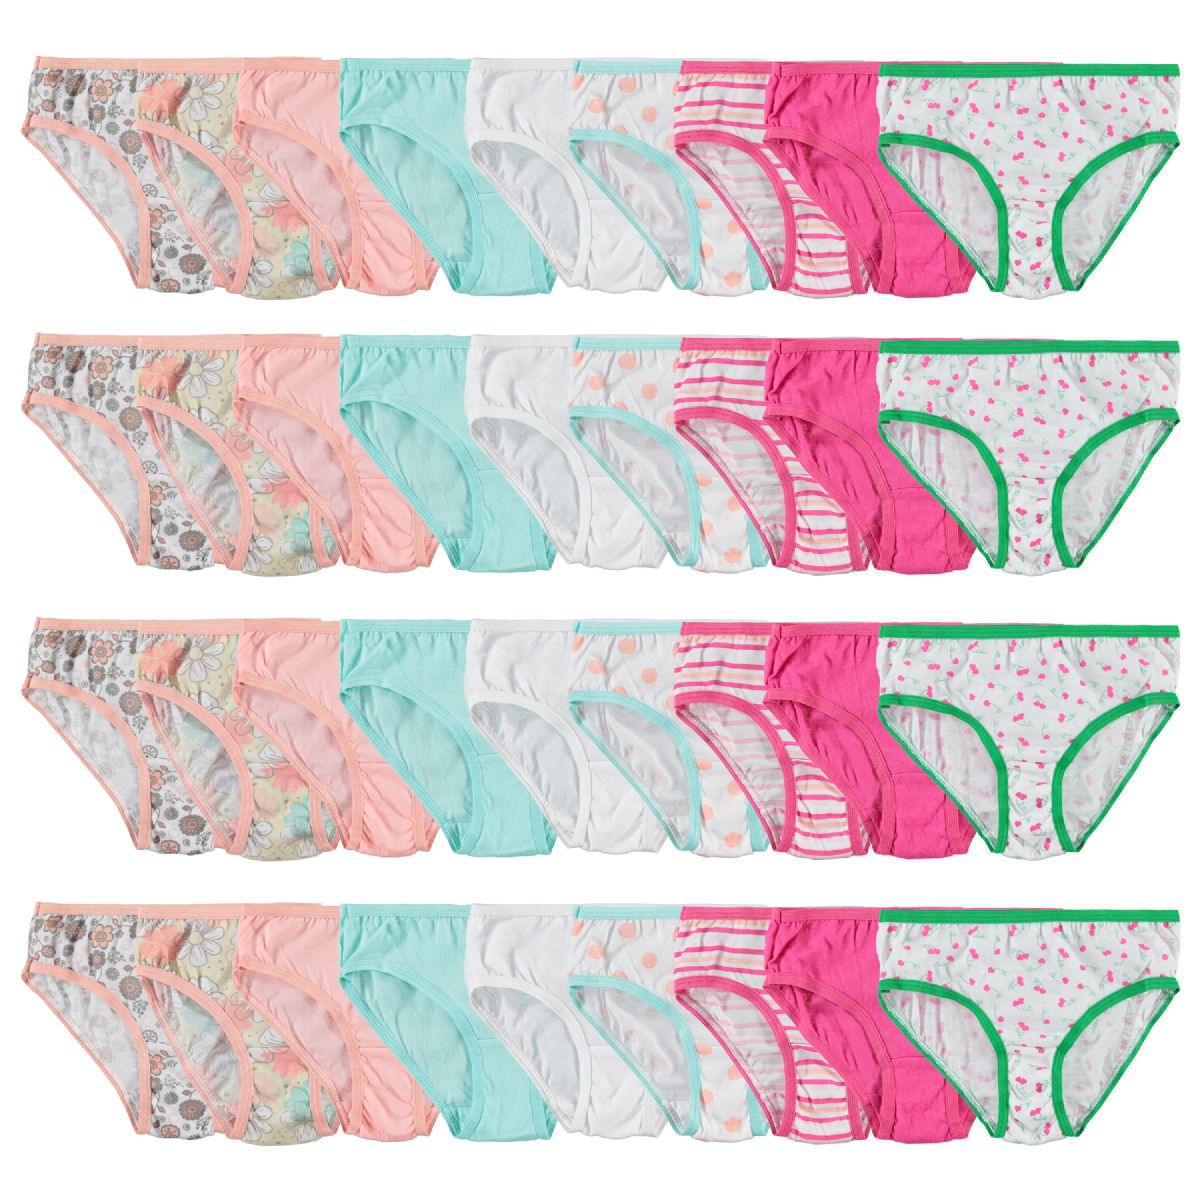 72 Wholesale Girls Cotton Blend Assorted Printed Underwear Size 14 - at 